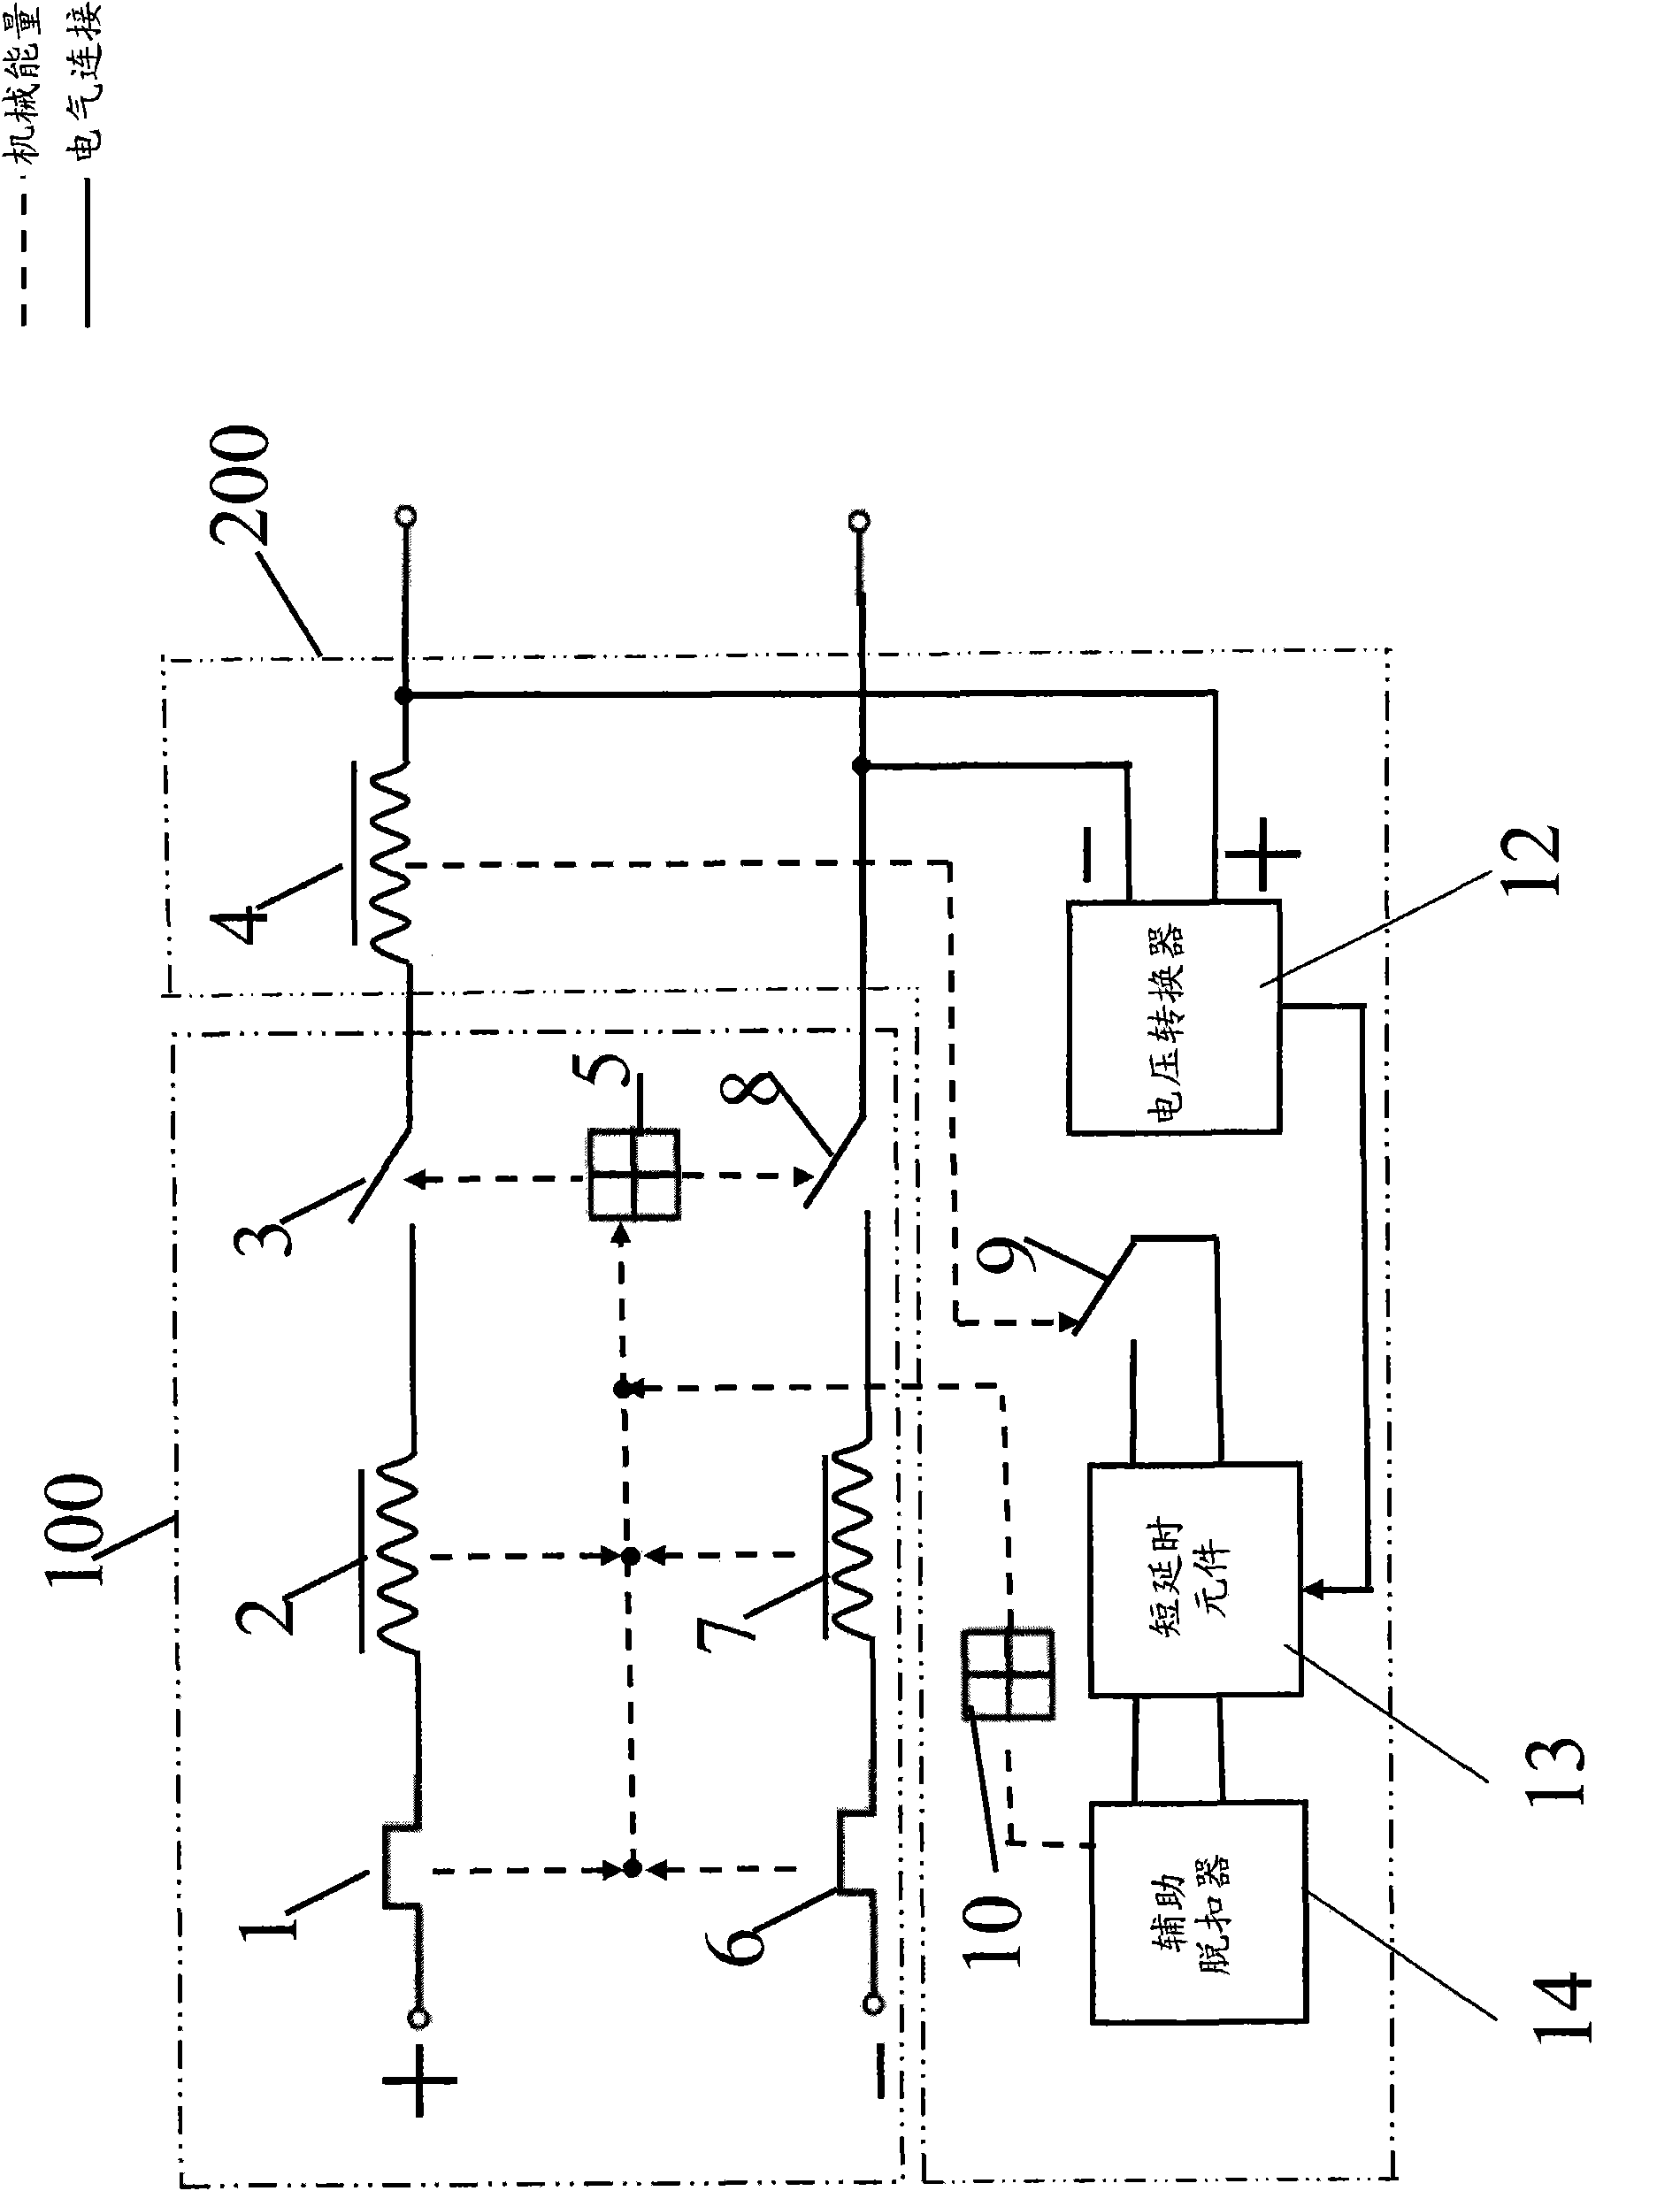 Direct-current circuit breaker with selectivity